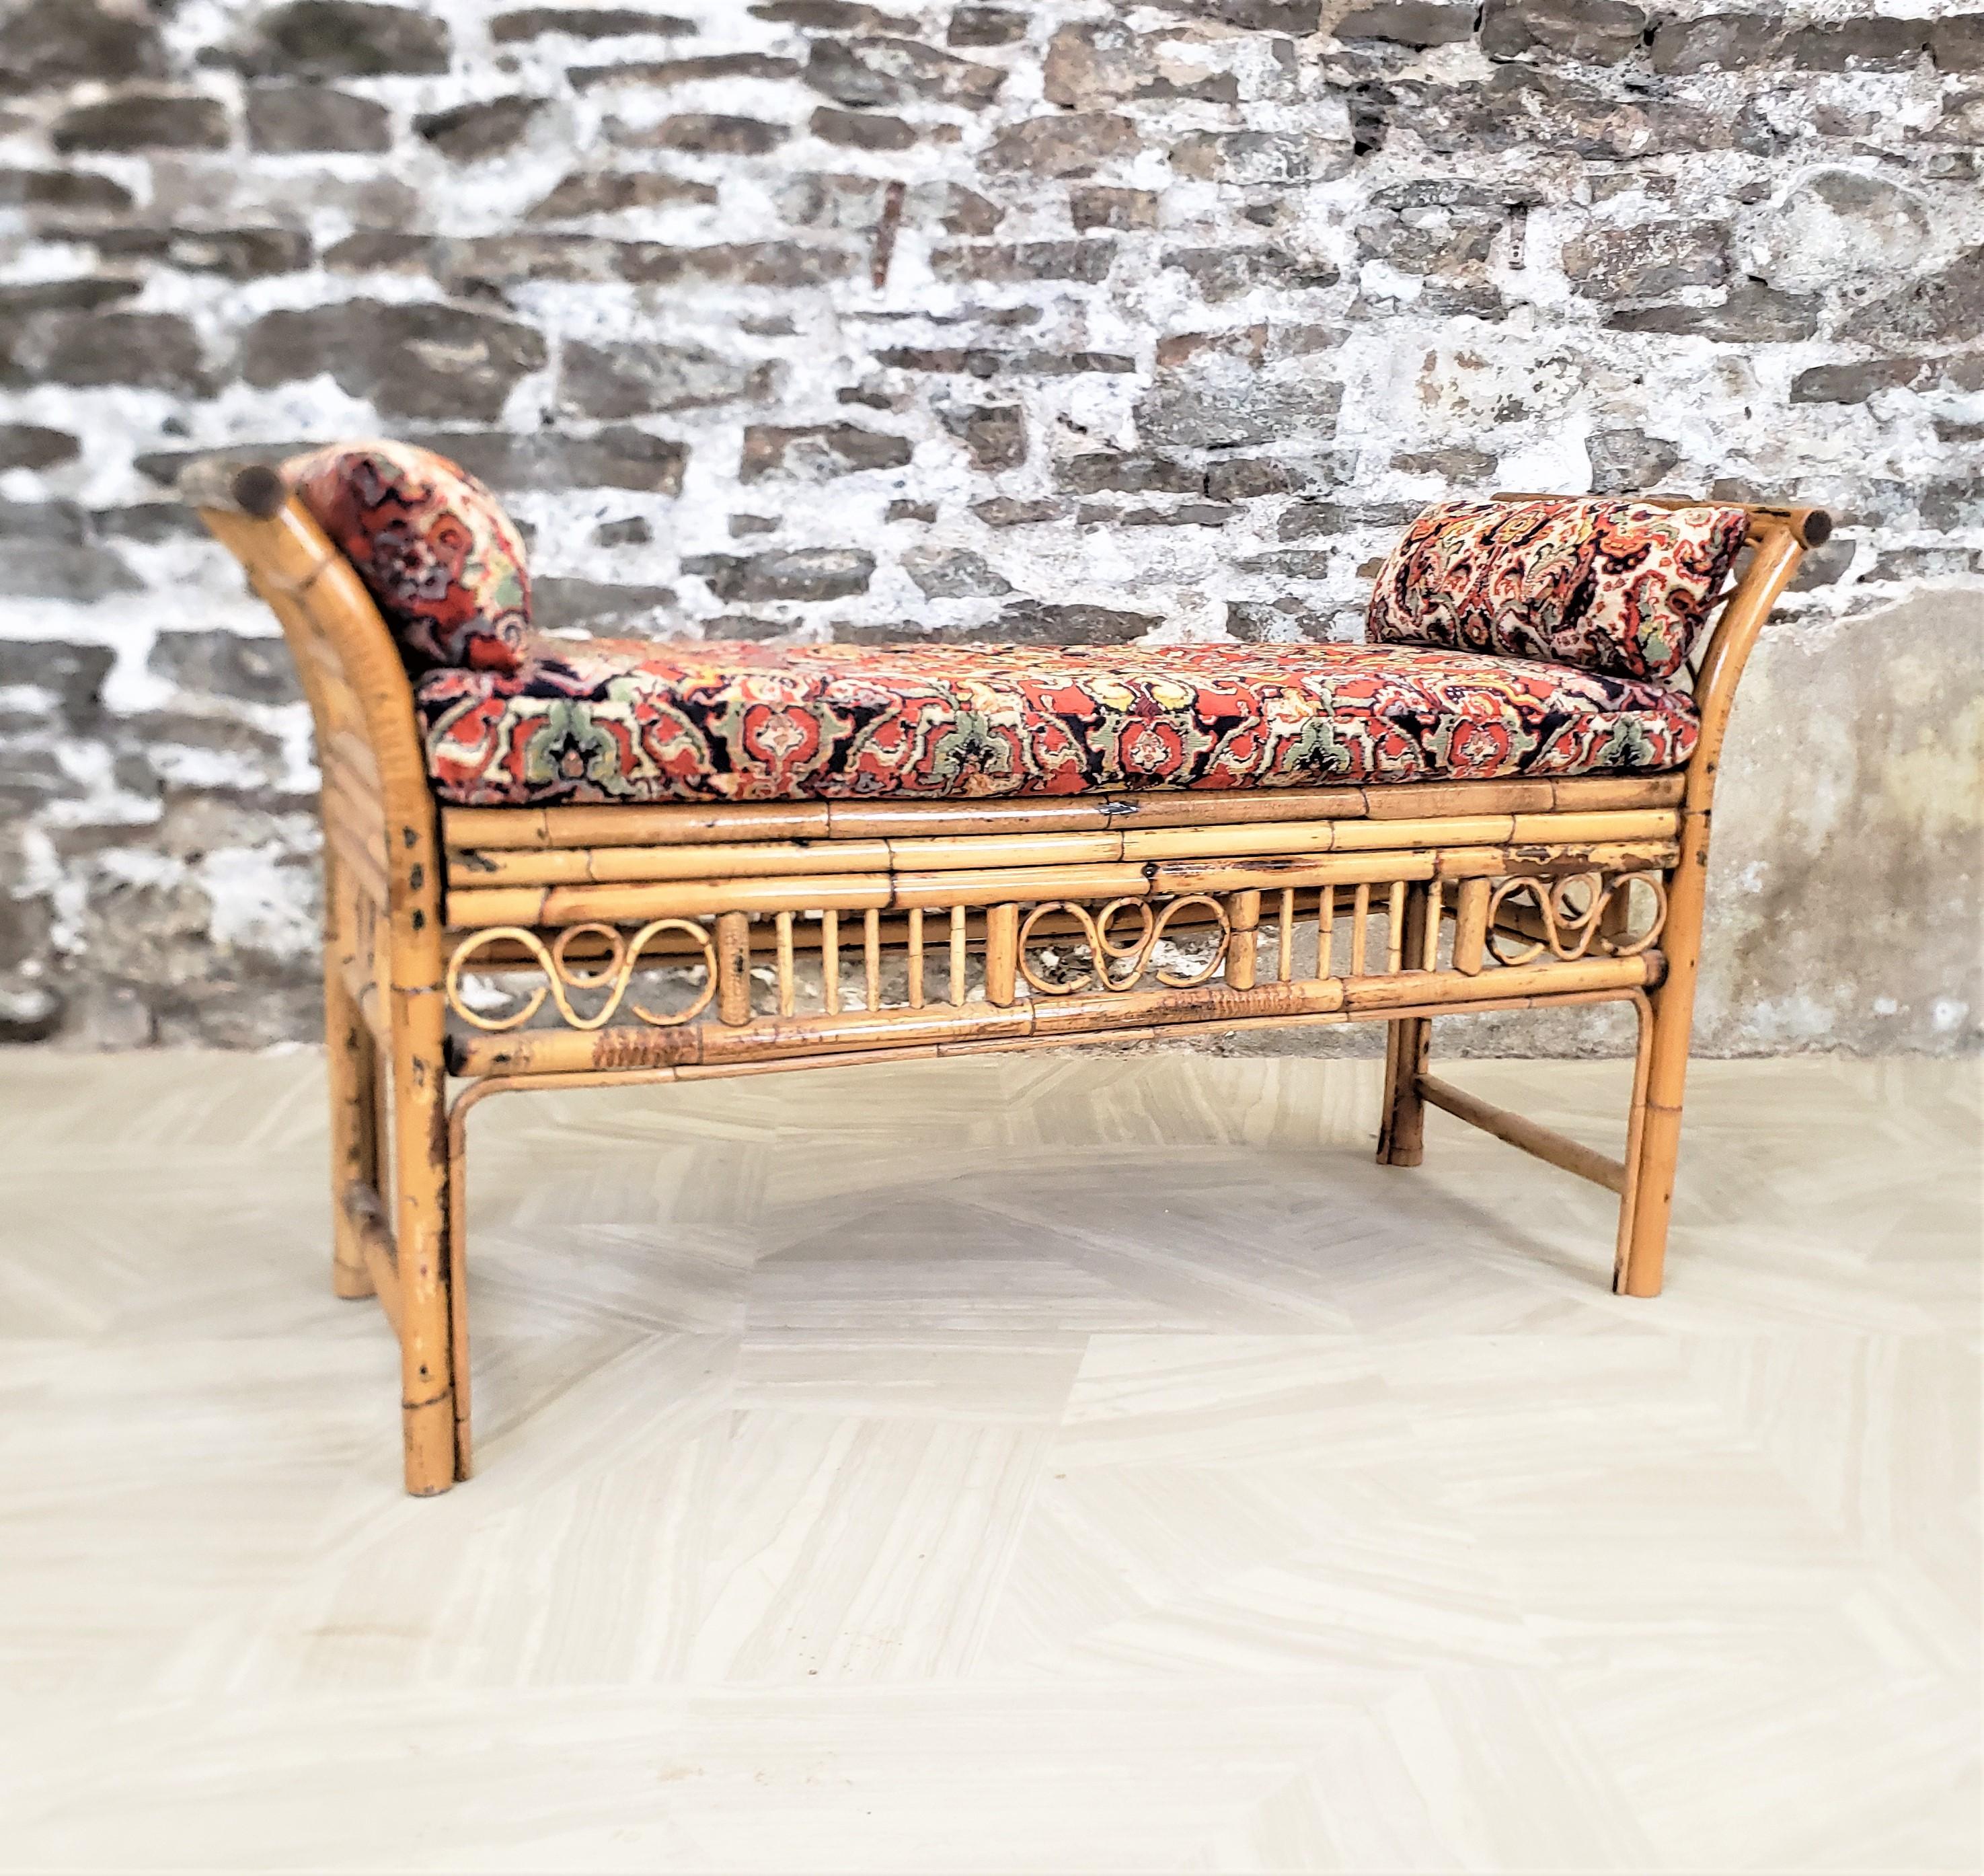 Italian Antique Art Deco Rattan Bohemian Styled Bench with Cushion & Bolsters For Sale